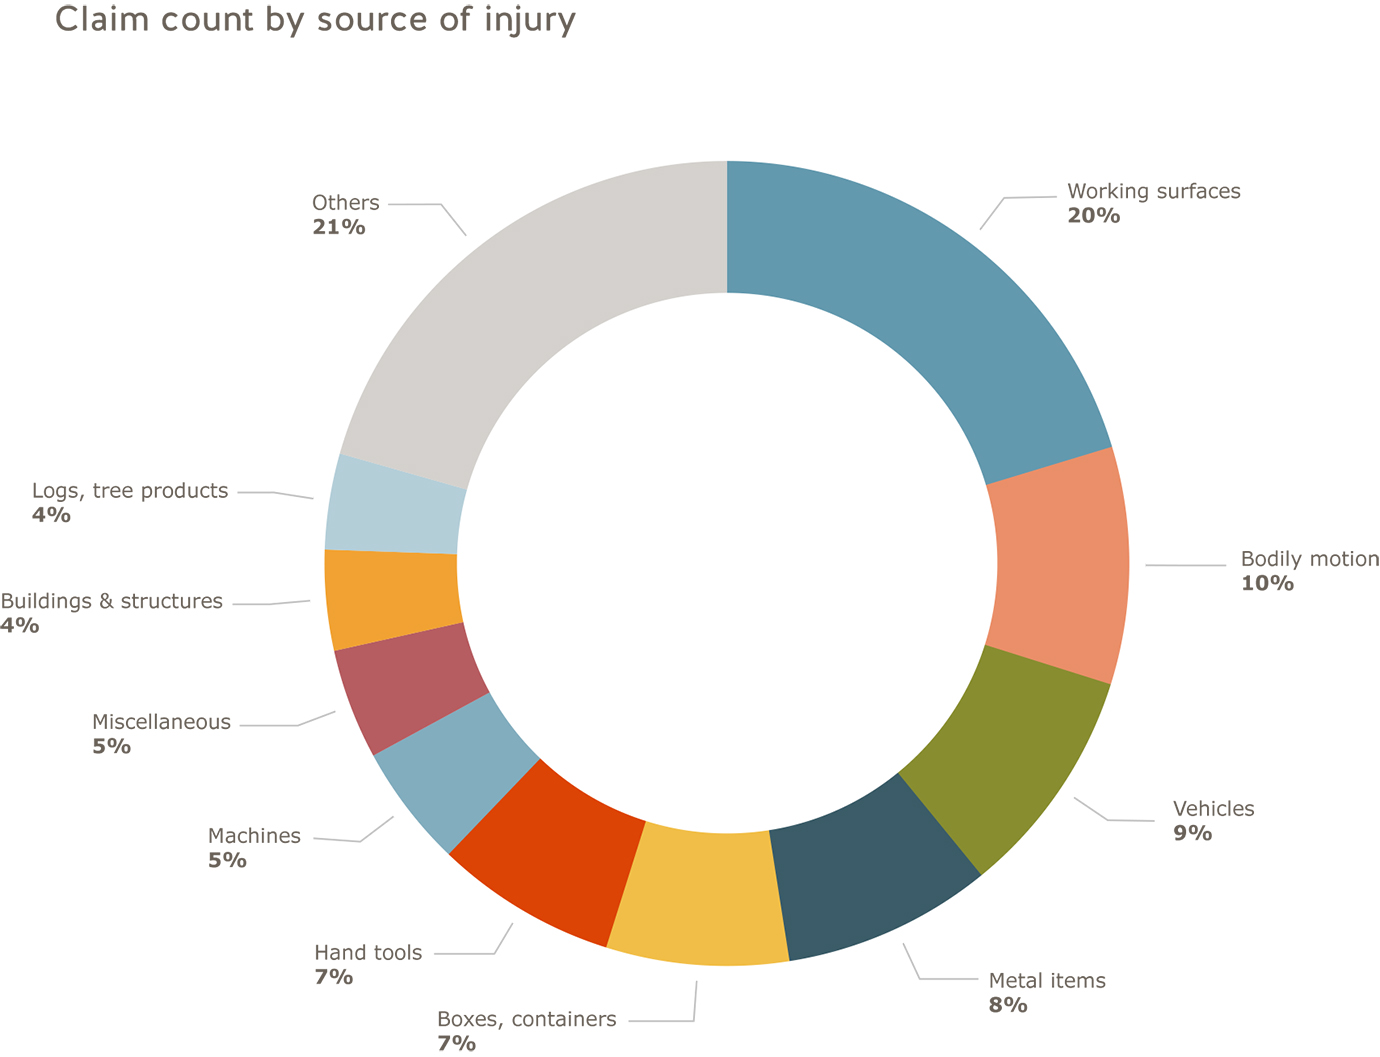 Small business industry claim count by source of injury: working surfaces=20%; bodily motion=10%; vehicles=9%; metal items=8%; boxes, containers=7%; hand tools=7%; machines=5%; miscellaneous=5%; buildings and structures=4%; logs, tree products=4%; others=21%